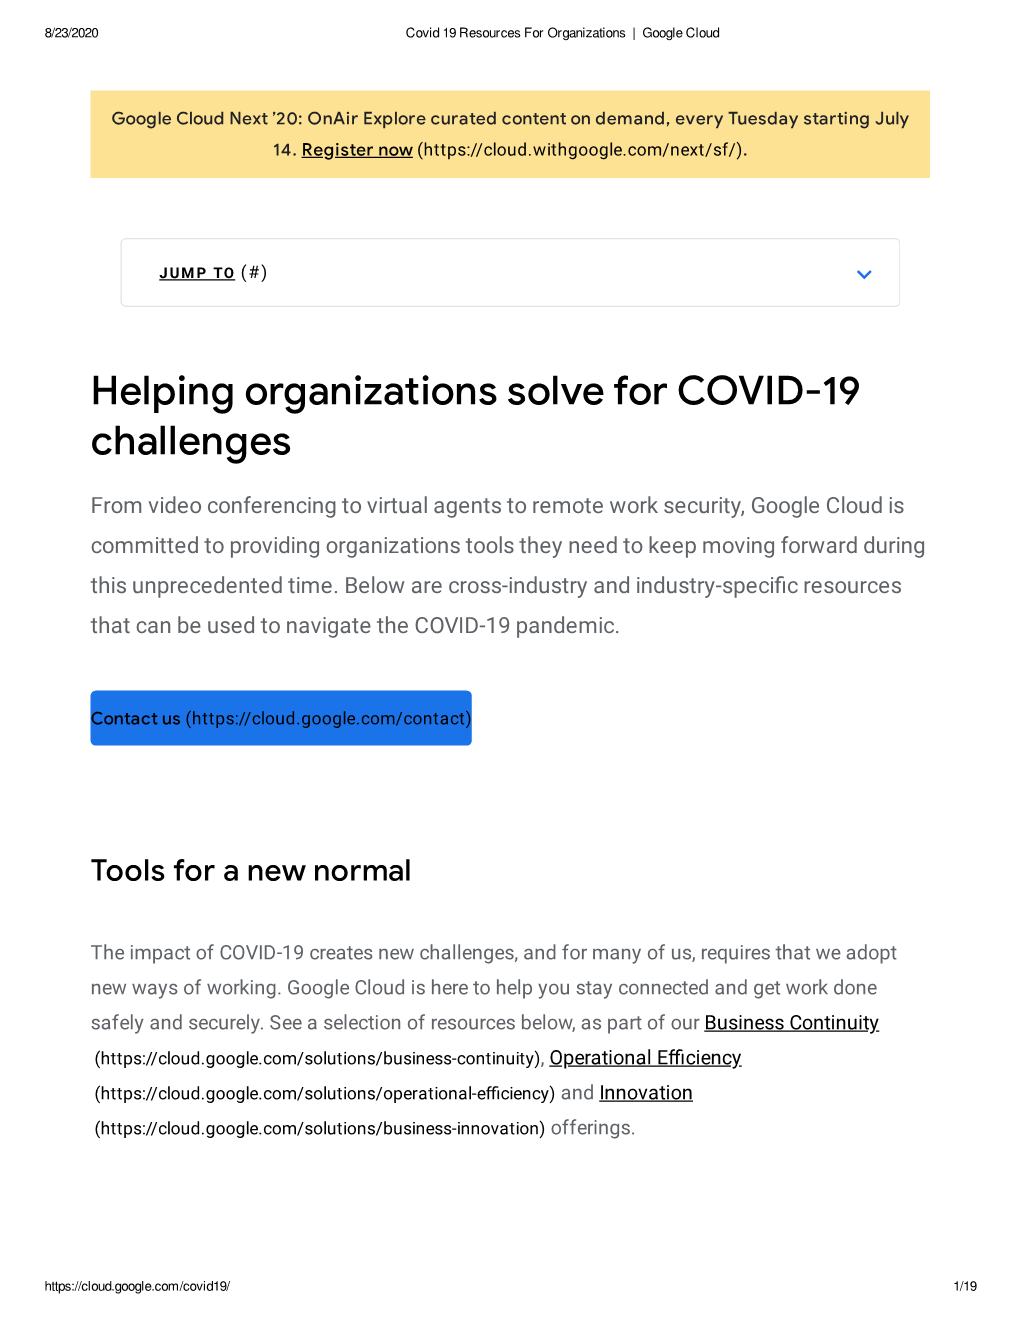 Helping Organizations Solve for COVID-19 Challenges